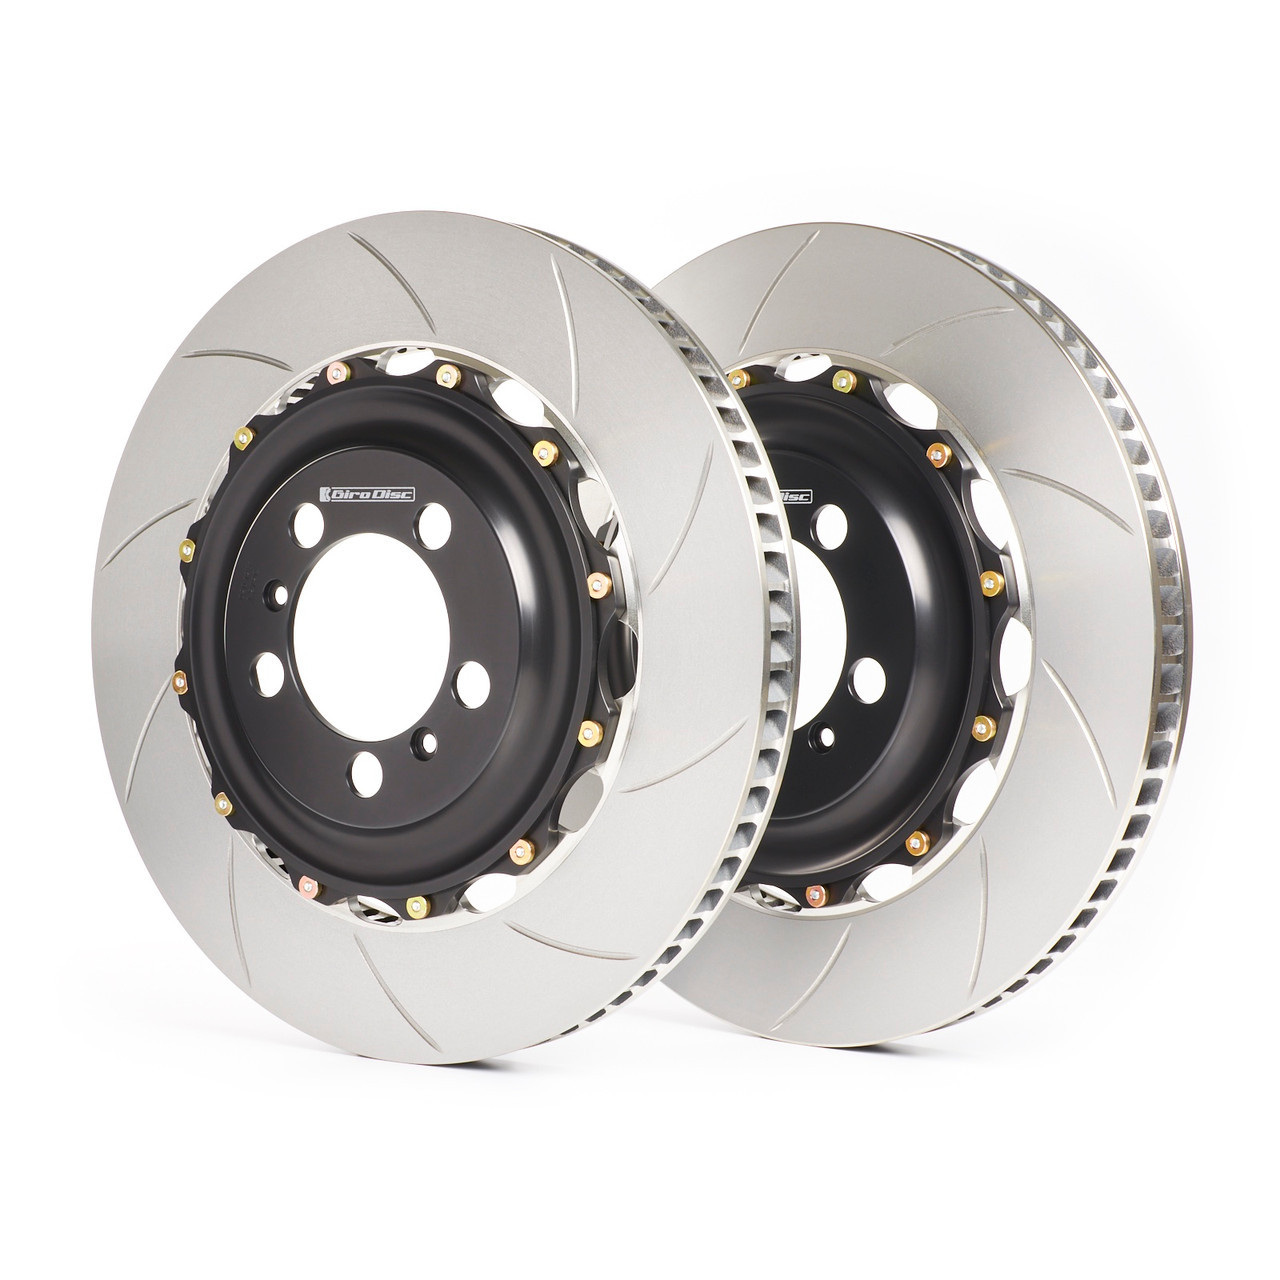 GiroDisc - 718 GT4 RS Front Rotors - (A1-291) - RSS / Road Sport